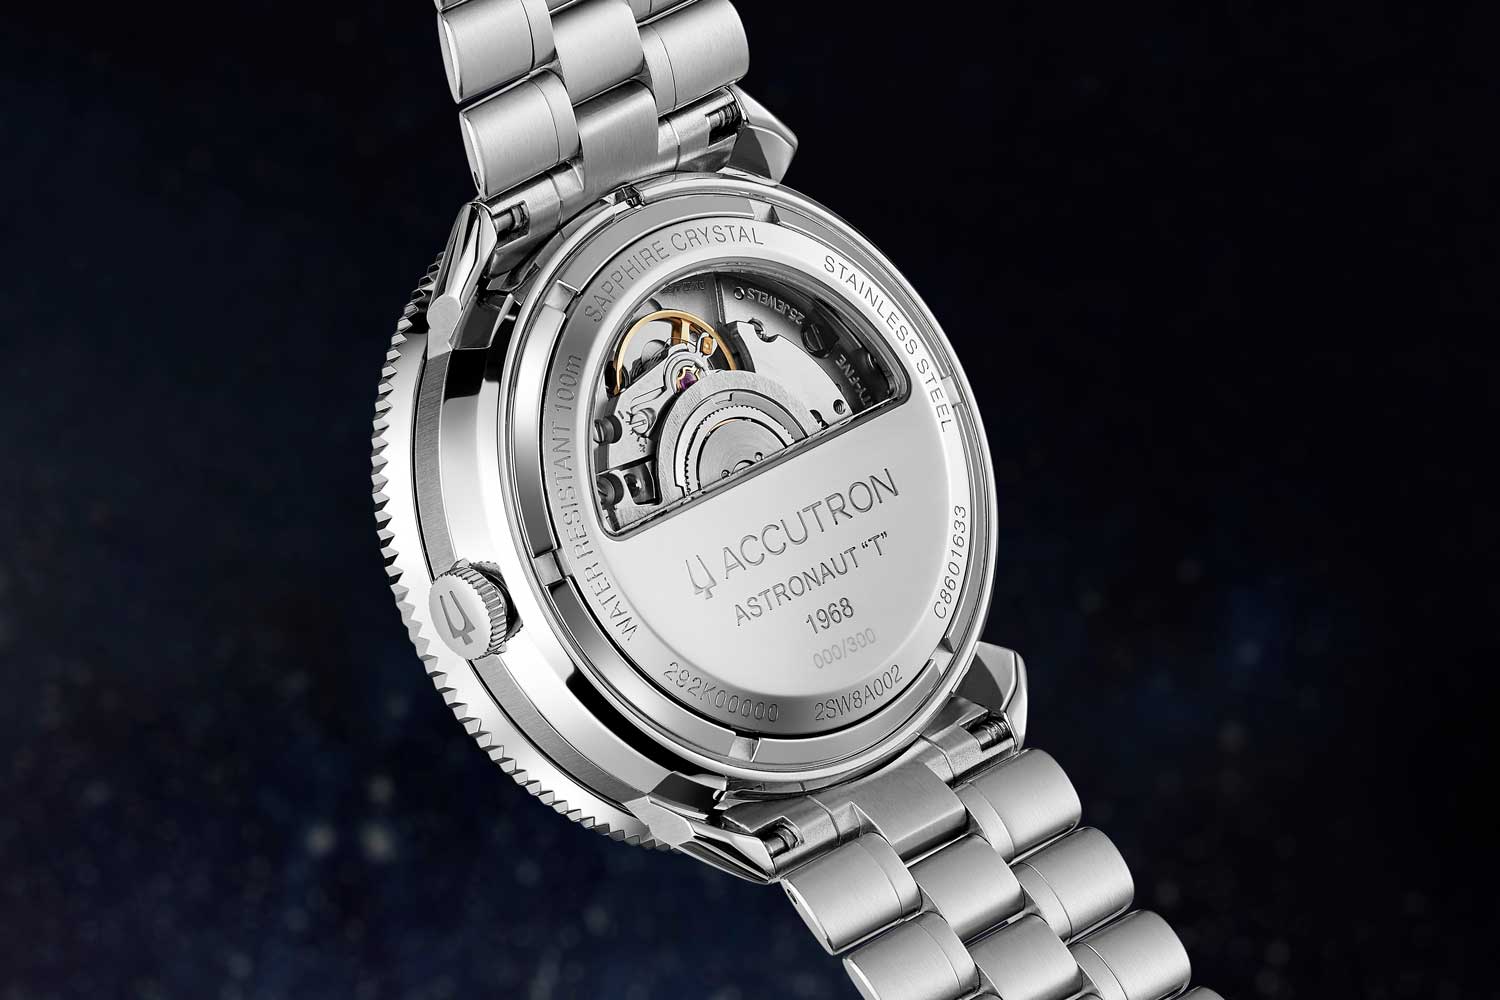 Accutron Astronaut GMT Limited Edition